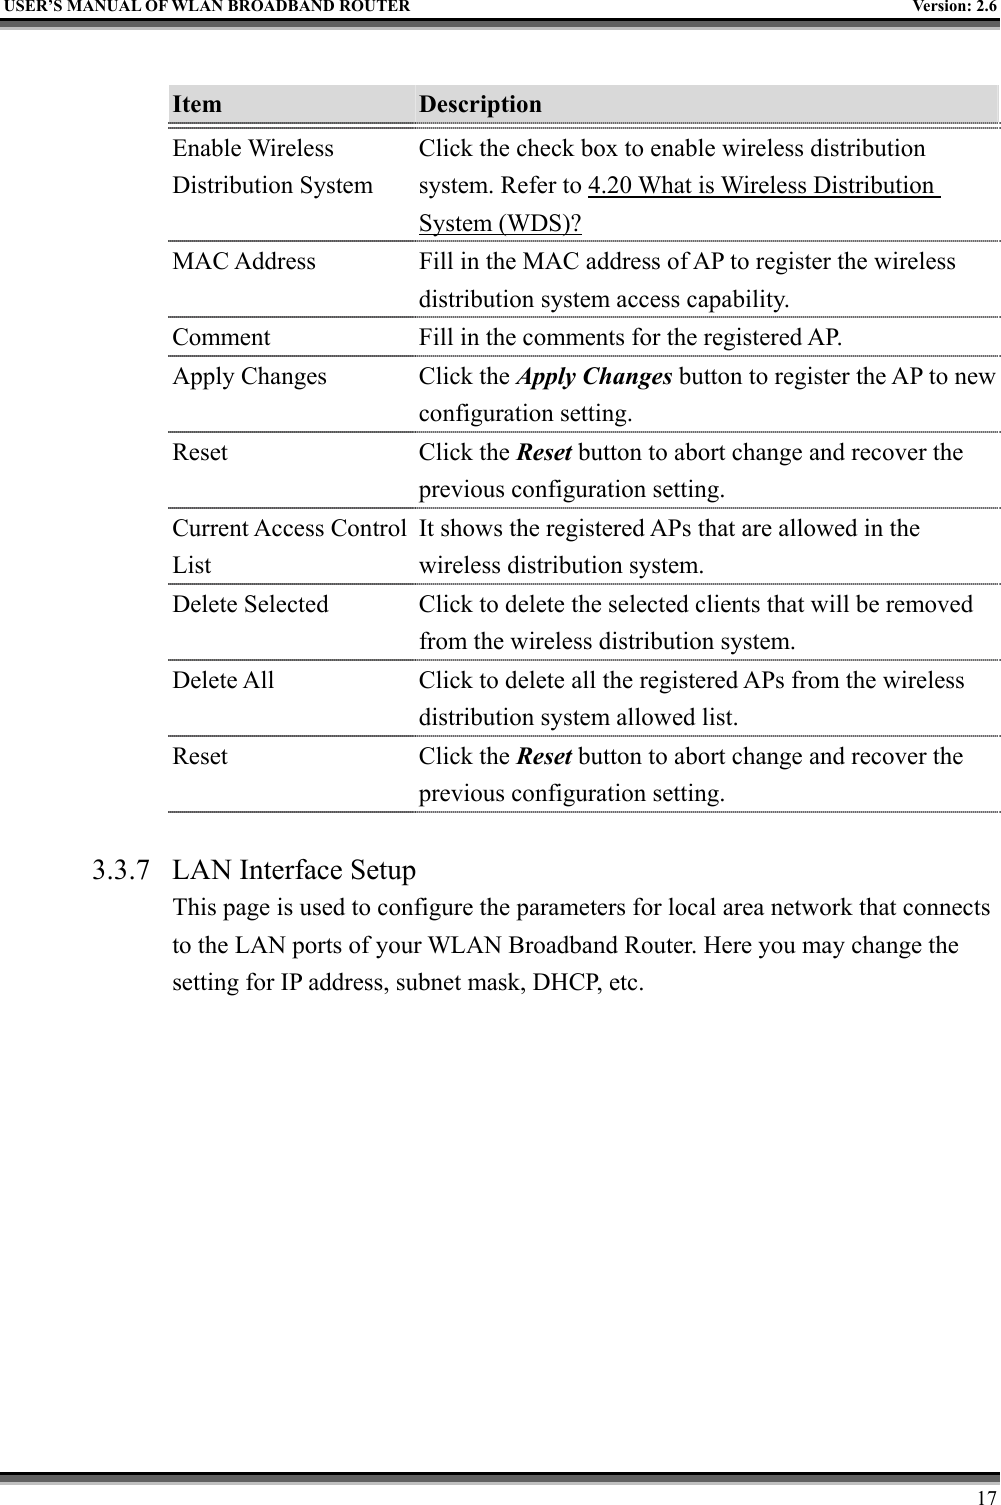   USER’S MANUAL OF WLAN BROADBAND ROUTER    Version: 2.6     17  Item  Description   Enable Wireless Distribution System Click the check box to enable wireless distribution system. Refer to 4.20 What is Wireless Distribution System (WDS)? MAC Address  Fill in the MAC address of AP to register the wireless distribution system access capability. Comment  Fill in the comments for the registered AP. Apply Changes  Click the Apply Changes button to register the AP to new configuration setting. Reset Click the Reset button to abort change and recover the previous configuration setting. Current Access Control List It shows the registered APs that are allowed in the wireless distribution system. Delete Selected  Click to delete the selected clients that will be removed from the wireless distribution system. Delete All  Click to delete all the registered APs from the wireless distribution system allowed list.   Reset Click the Reset button to abort change and recover the previous configuration setting.  3.3.7  LAN Interface Setup This page is used to configure the parameters for local area network that connects to the LAN ports of your WLAN Broadband Router. Here you may change the setting for IP address, subnet mask, DHCP, etc.  